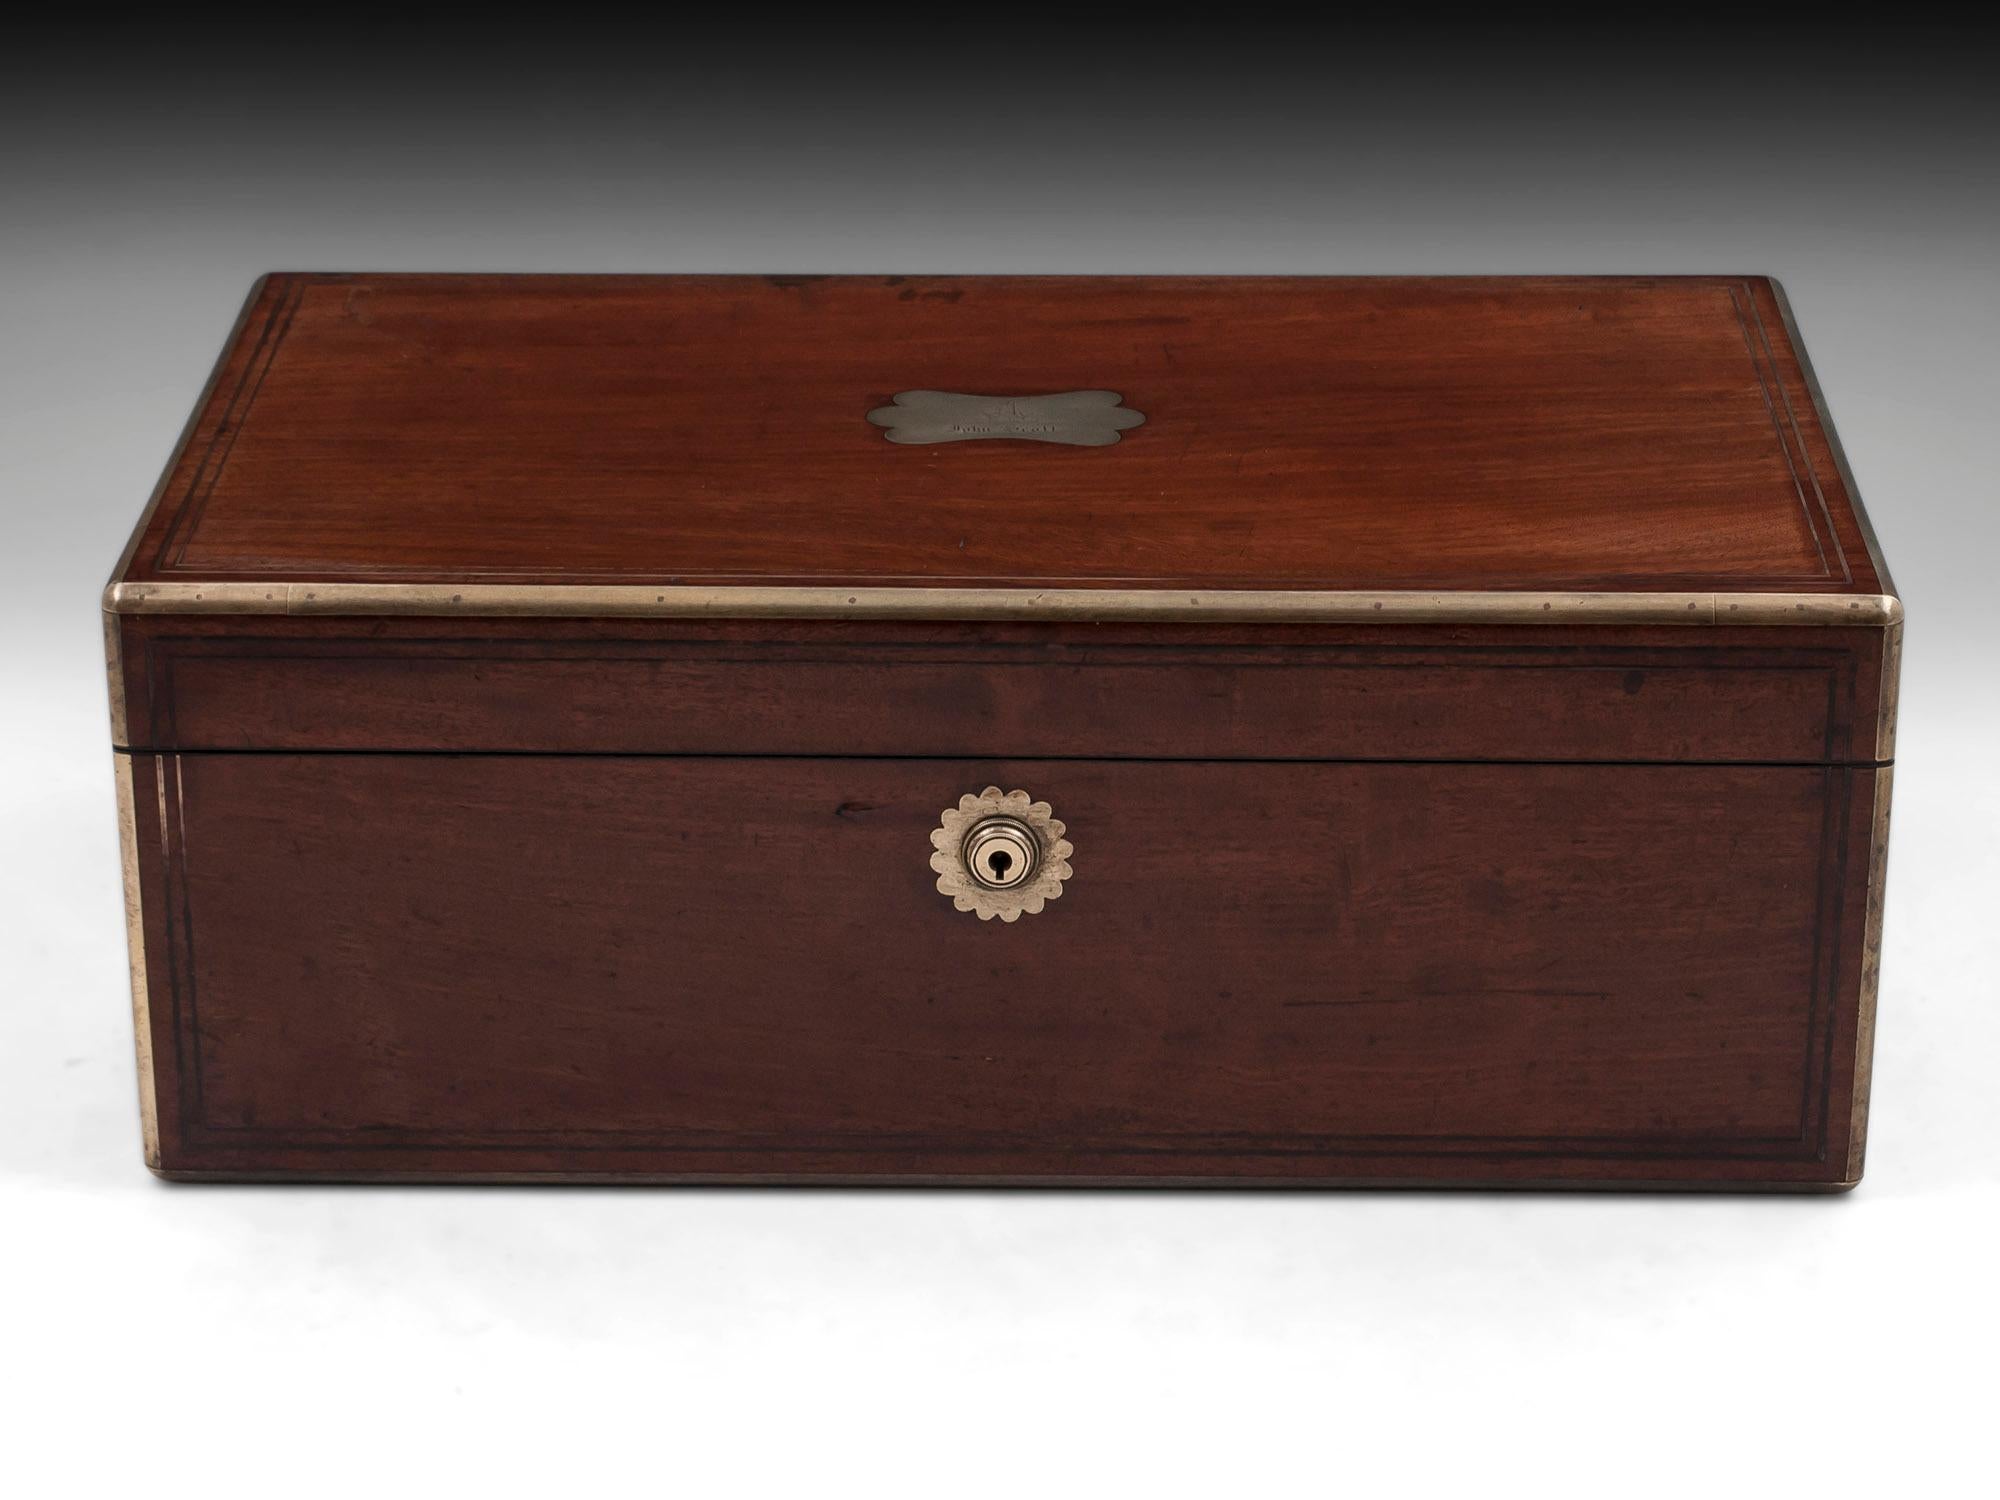 Antique brass bound mahogany writing box with double brass stringing, flush carry handles and shaped initial plate with an engraved coat of arms and the name John Scott.
The interior features a burgundy leather writing surface with beautiful gold